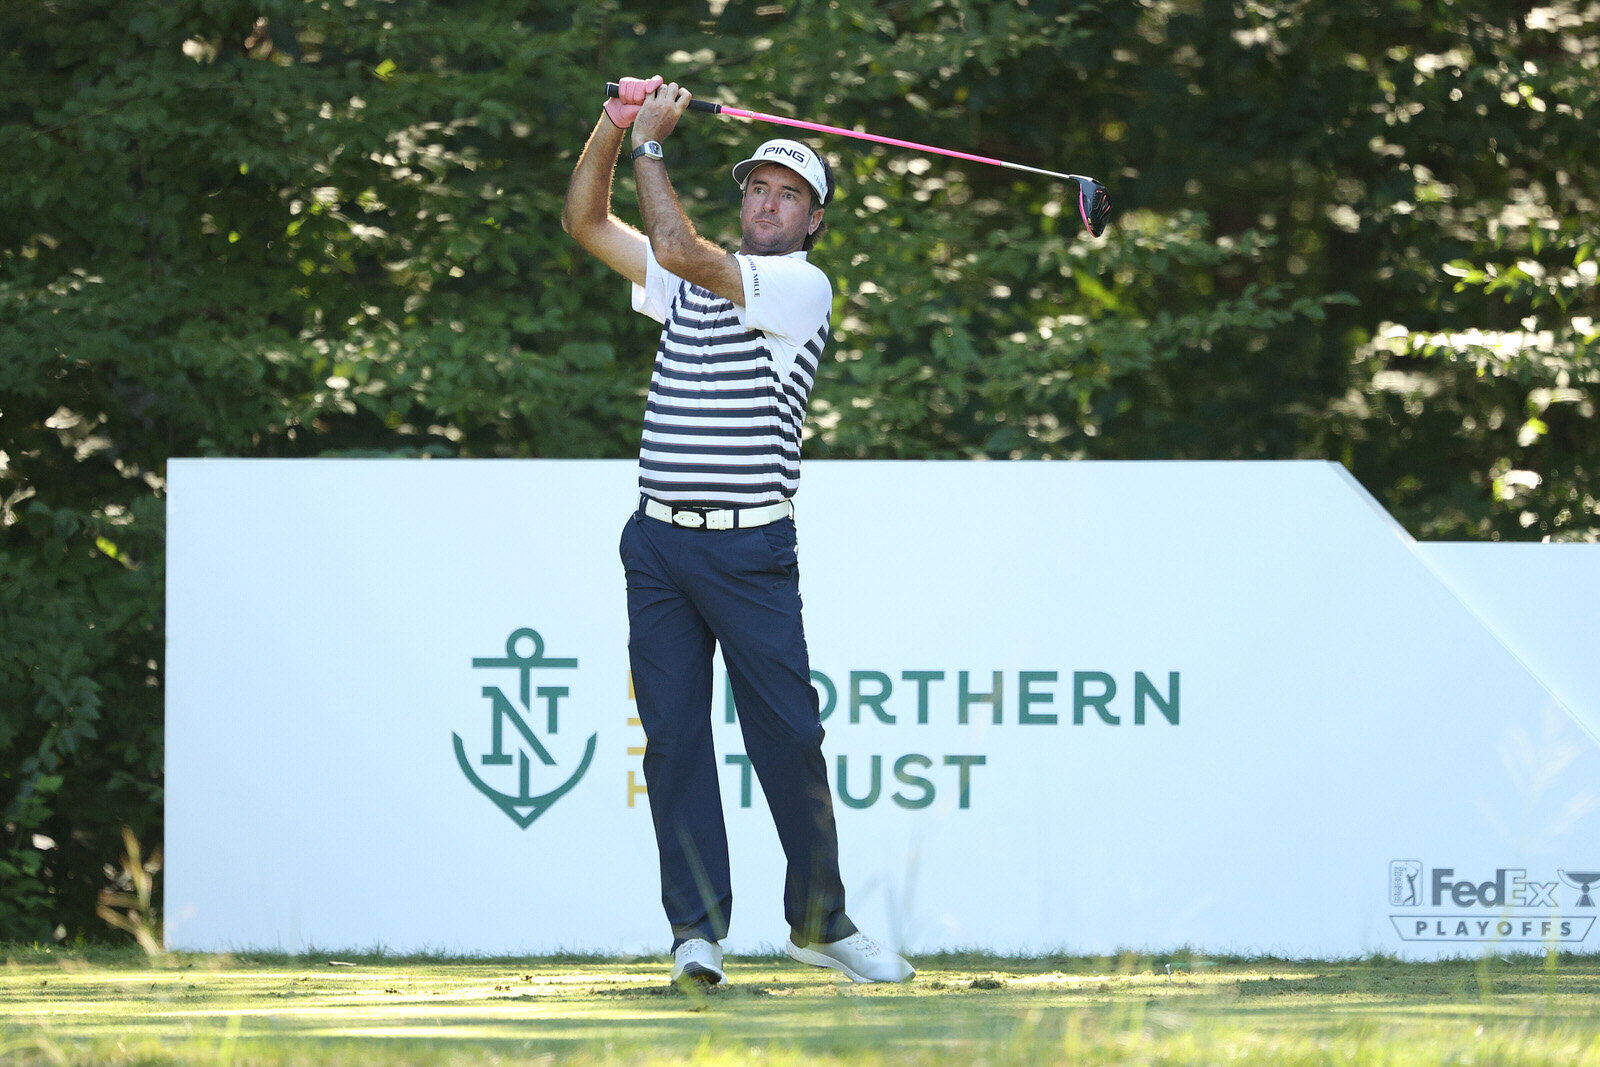  NORTON, MASSACHUSETTS - AUGUST 20:  Bubba Watson of the United States plays his shot from the fifth tee during the first round of The Northern Trust at TPC Boston on August 20, 2020 in Norton, Massachusetts. (Photo by Maddie Meyer/Getty Images) 